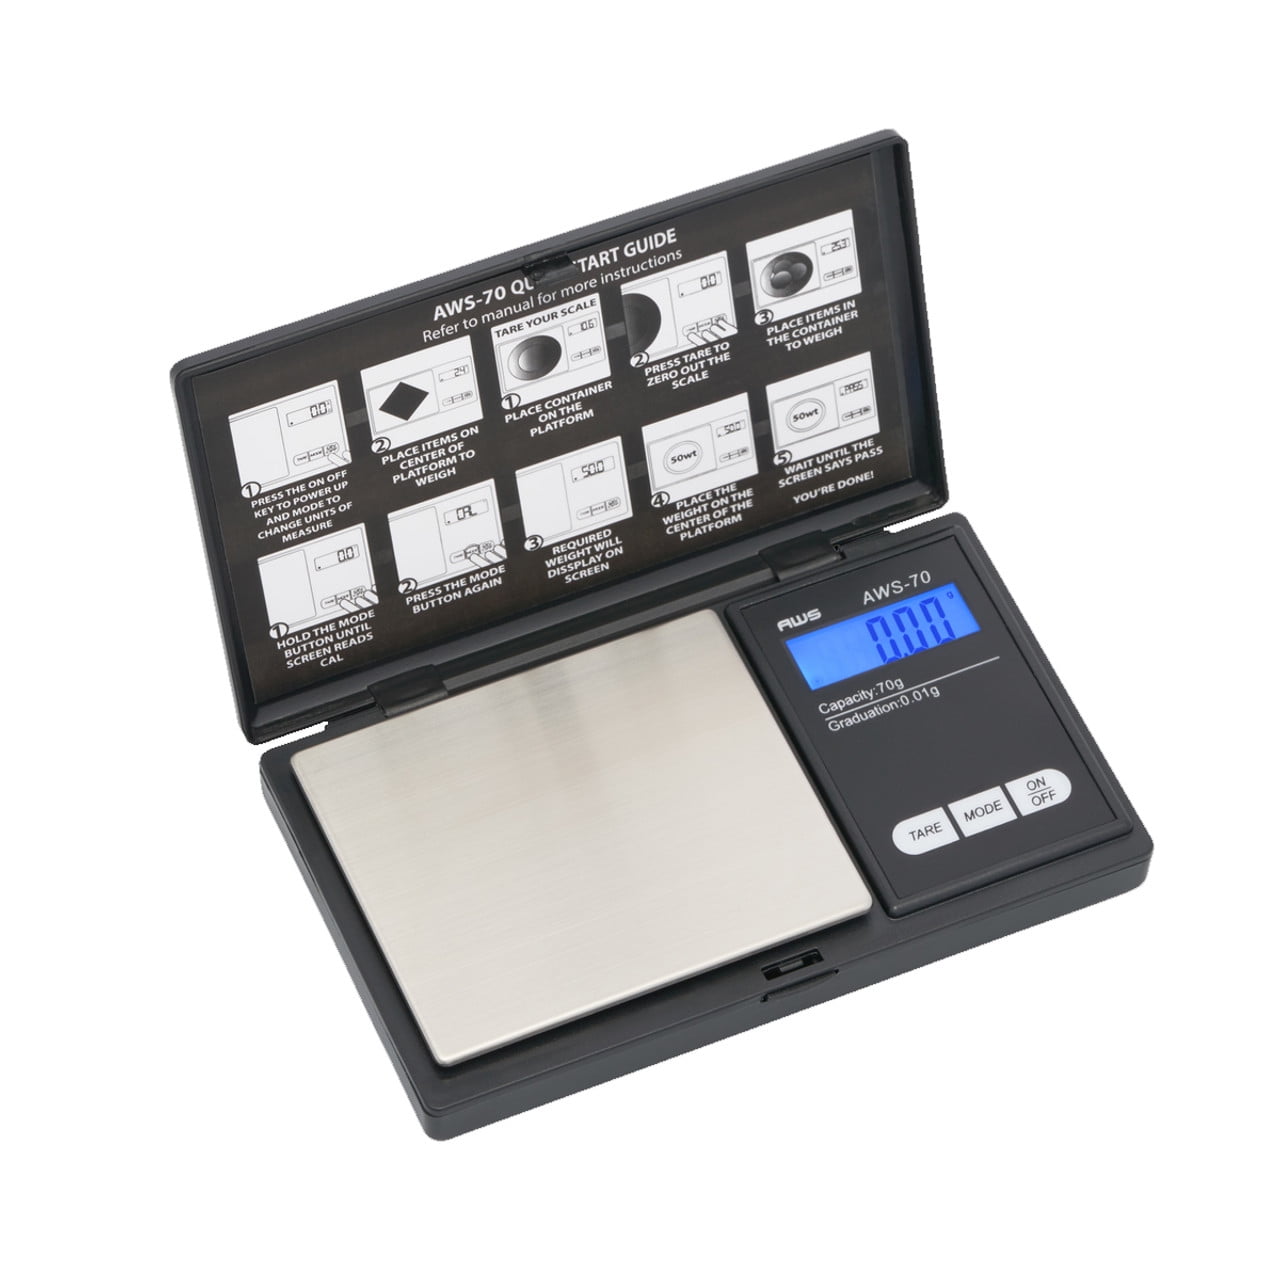 Gram Scale 220g / 0.01g, Digital Pocket Scale with 100g Calibration Weight,Mini Jewelry Scale, Kitchen Scale,6 Units Conversion, Tare & LCD Display, A